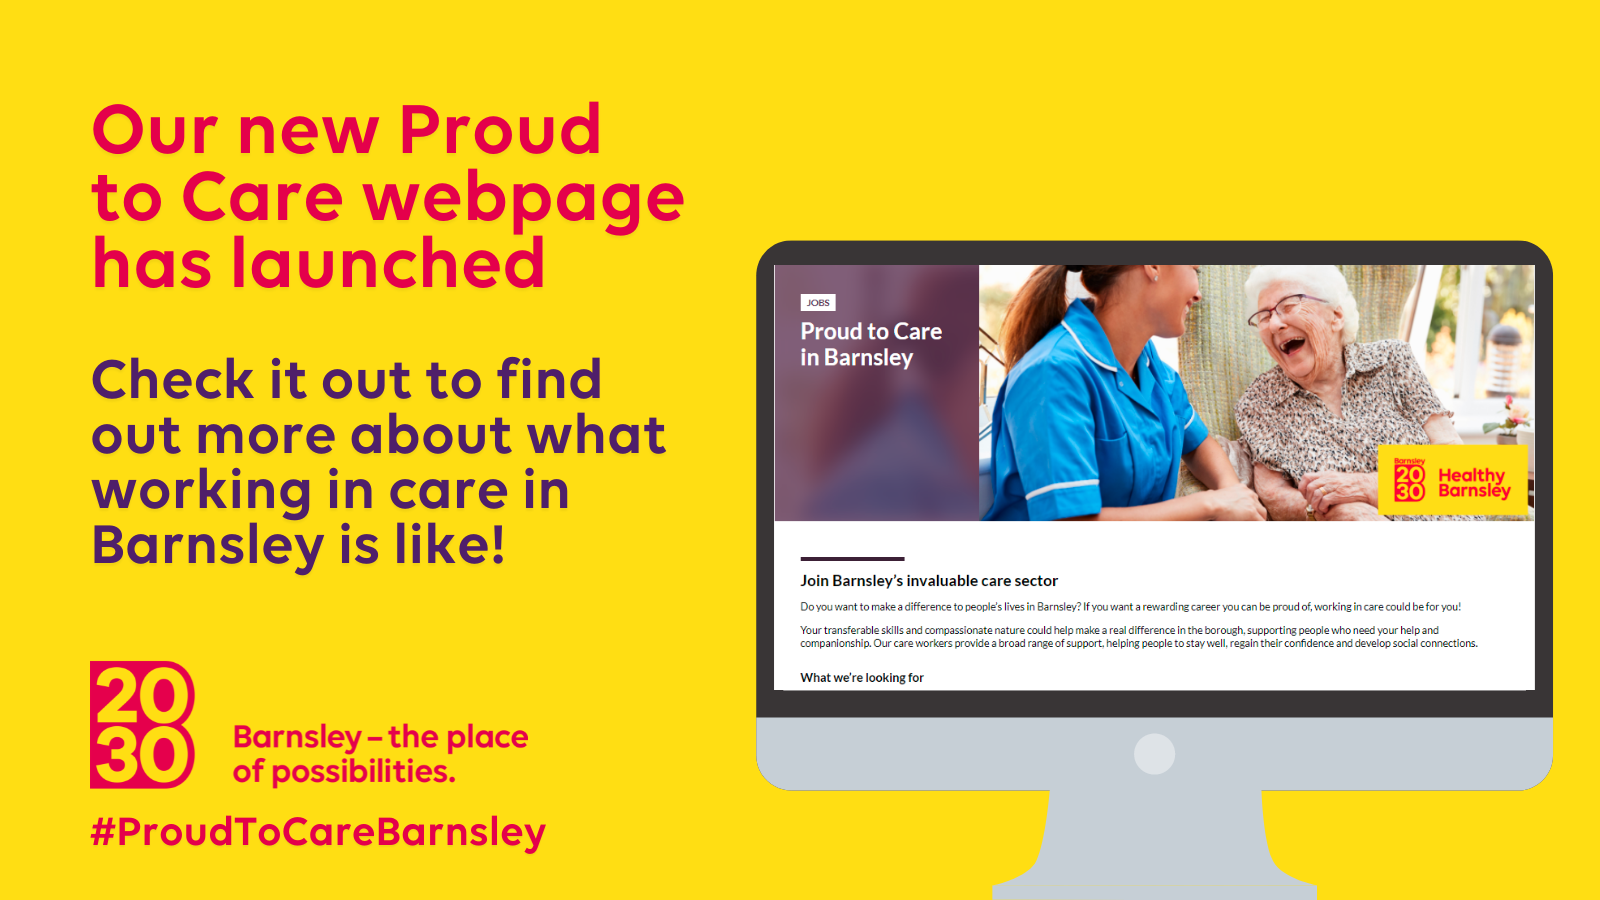 Our new Proud to Care webpage has launched. Check it out to find out more about what working in care in Barnsley is like!